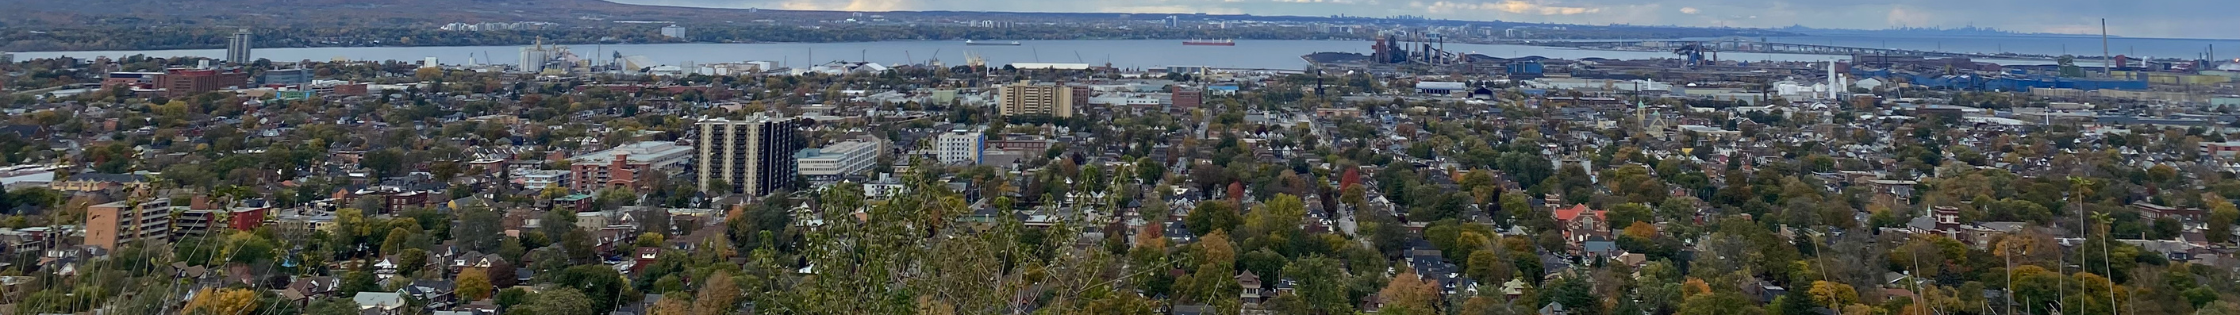 Picture of the City of Hamilton